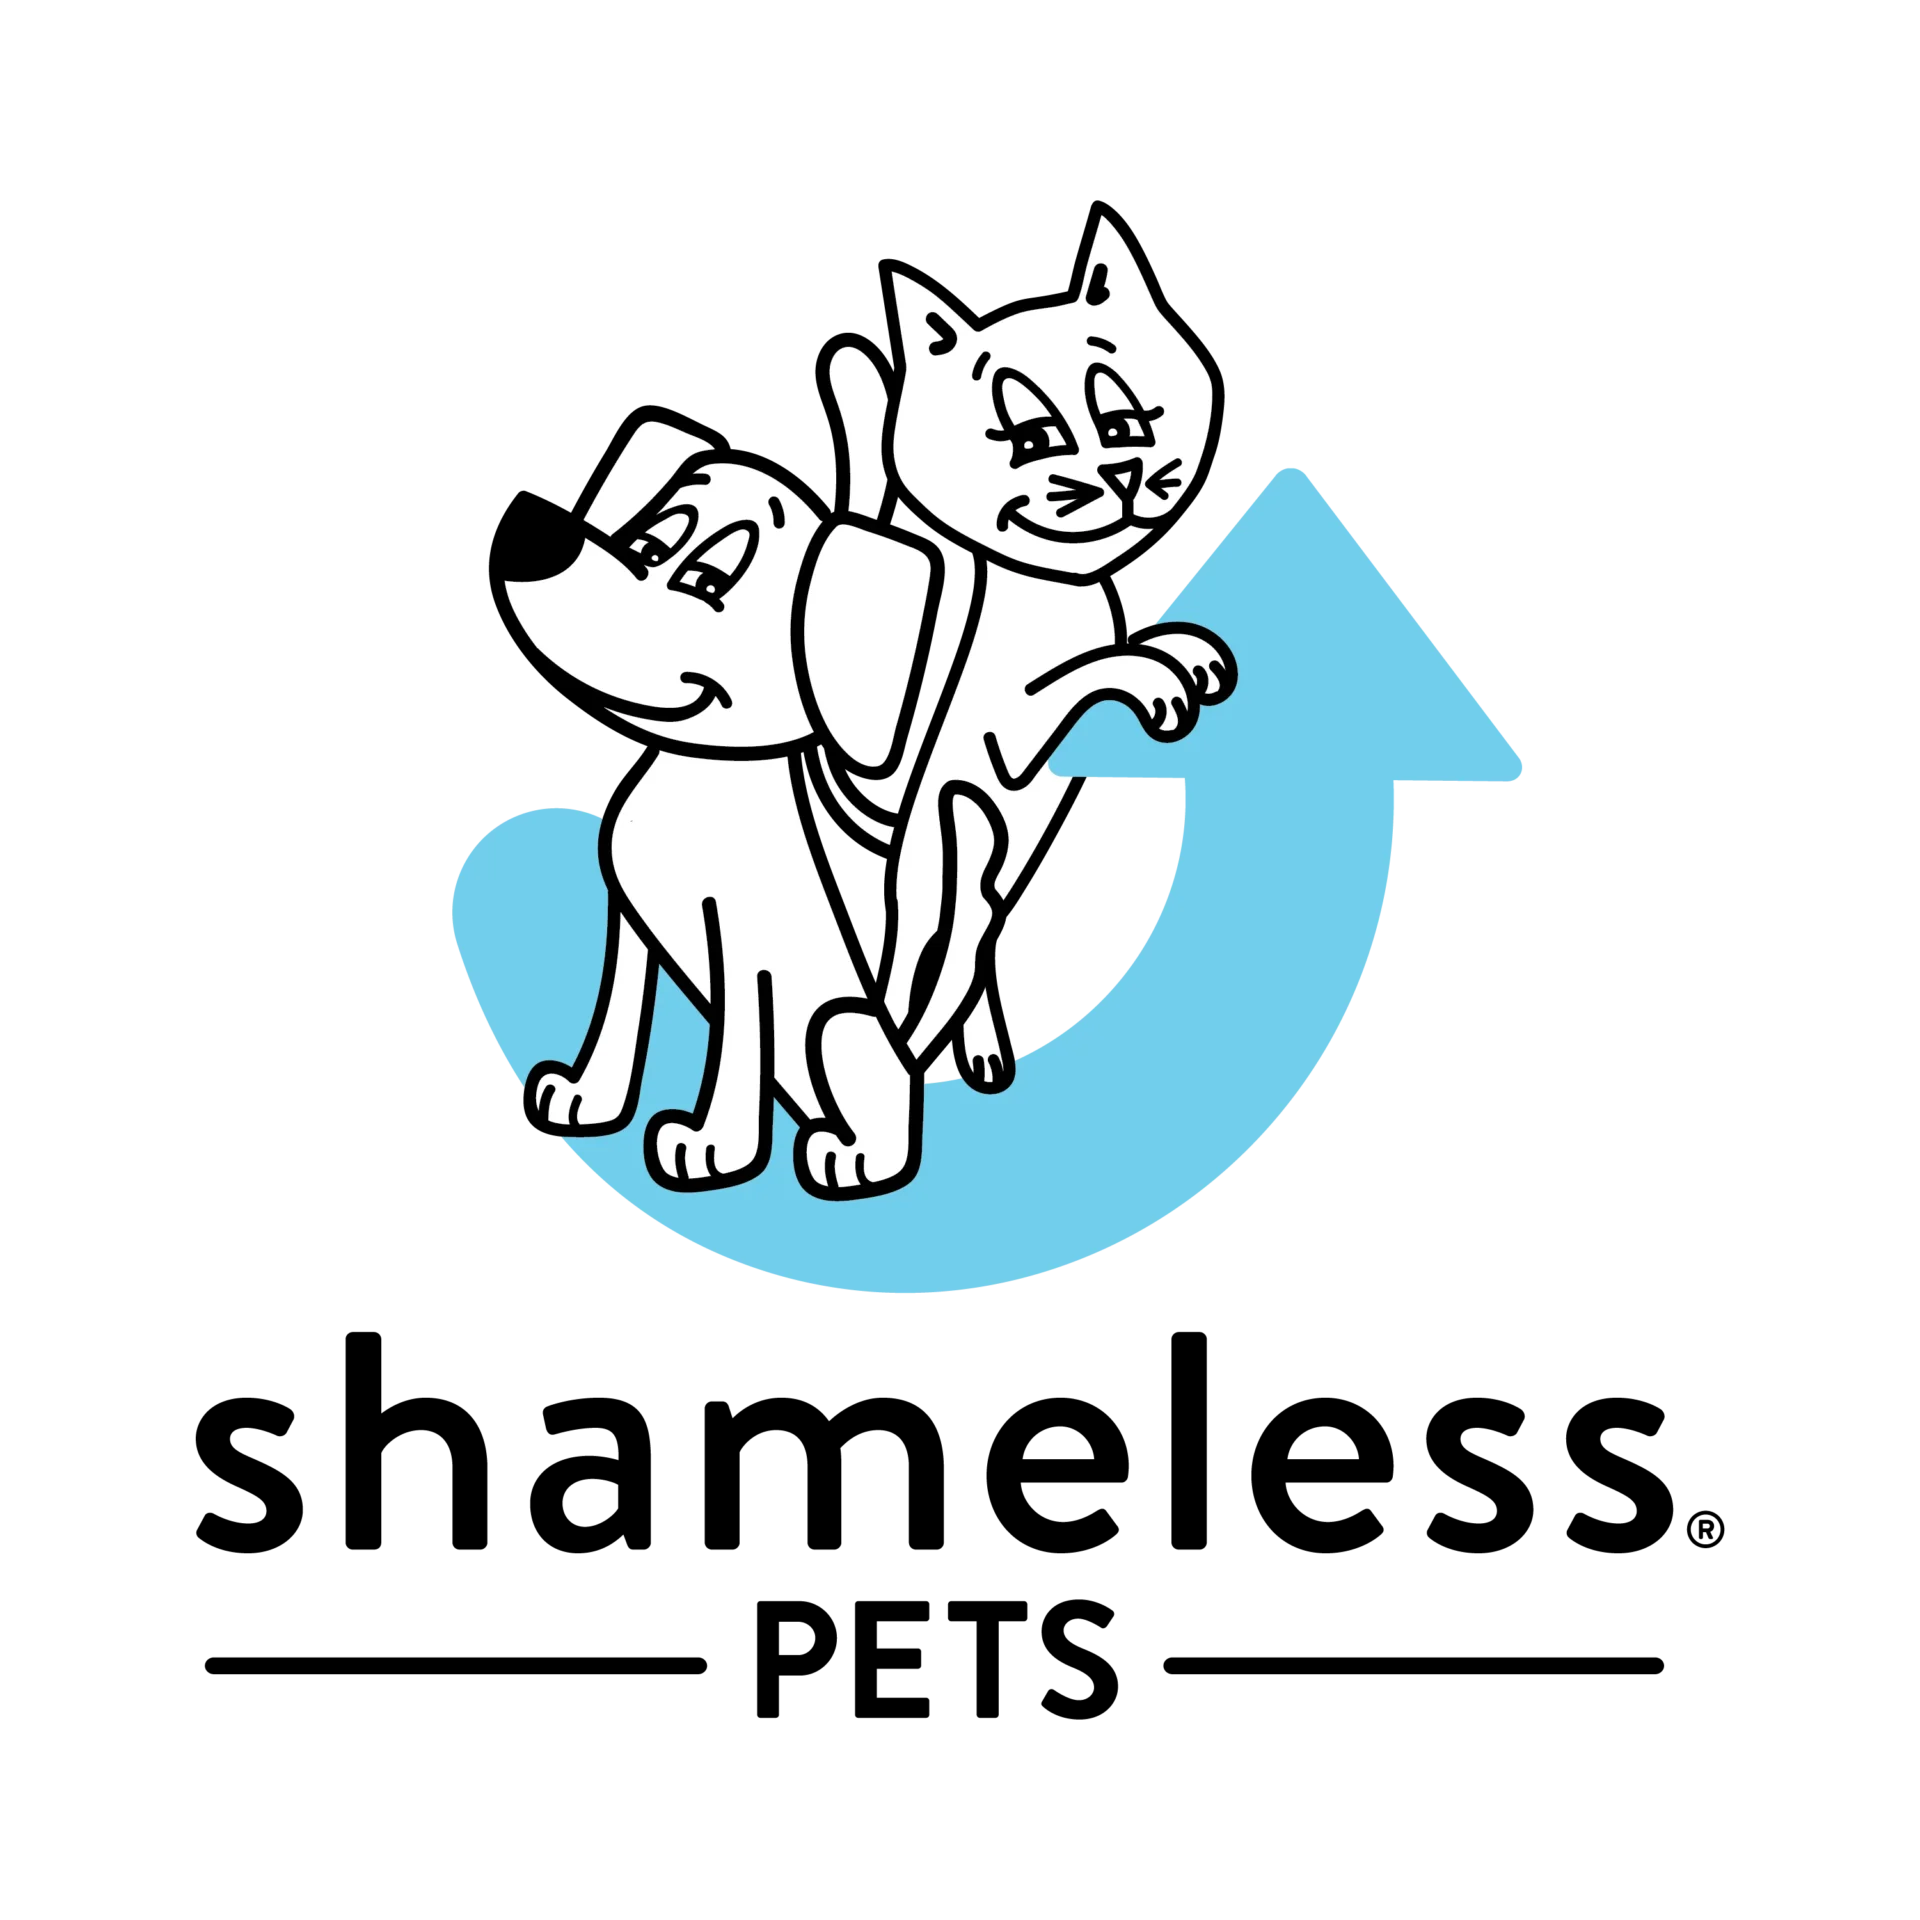 A cartoon of two cats and one dog